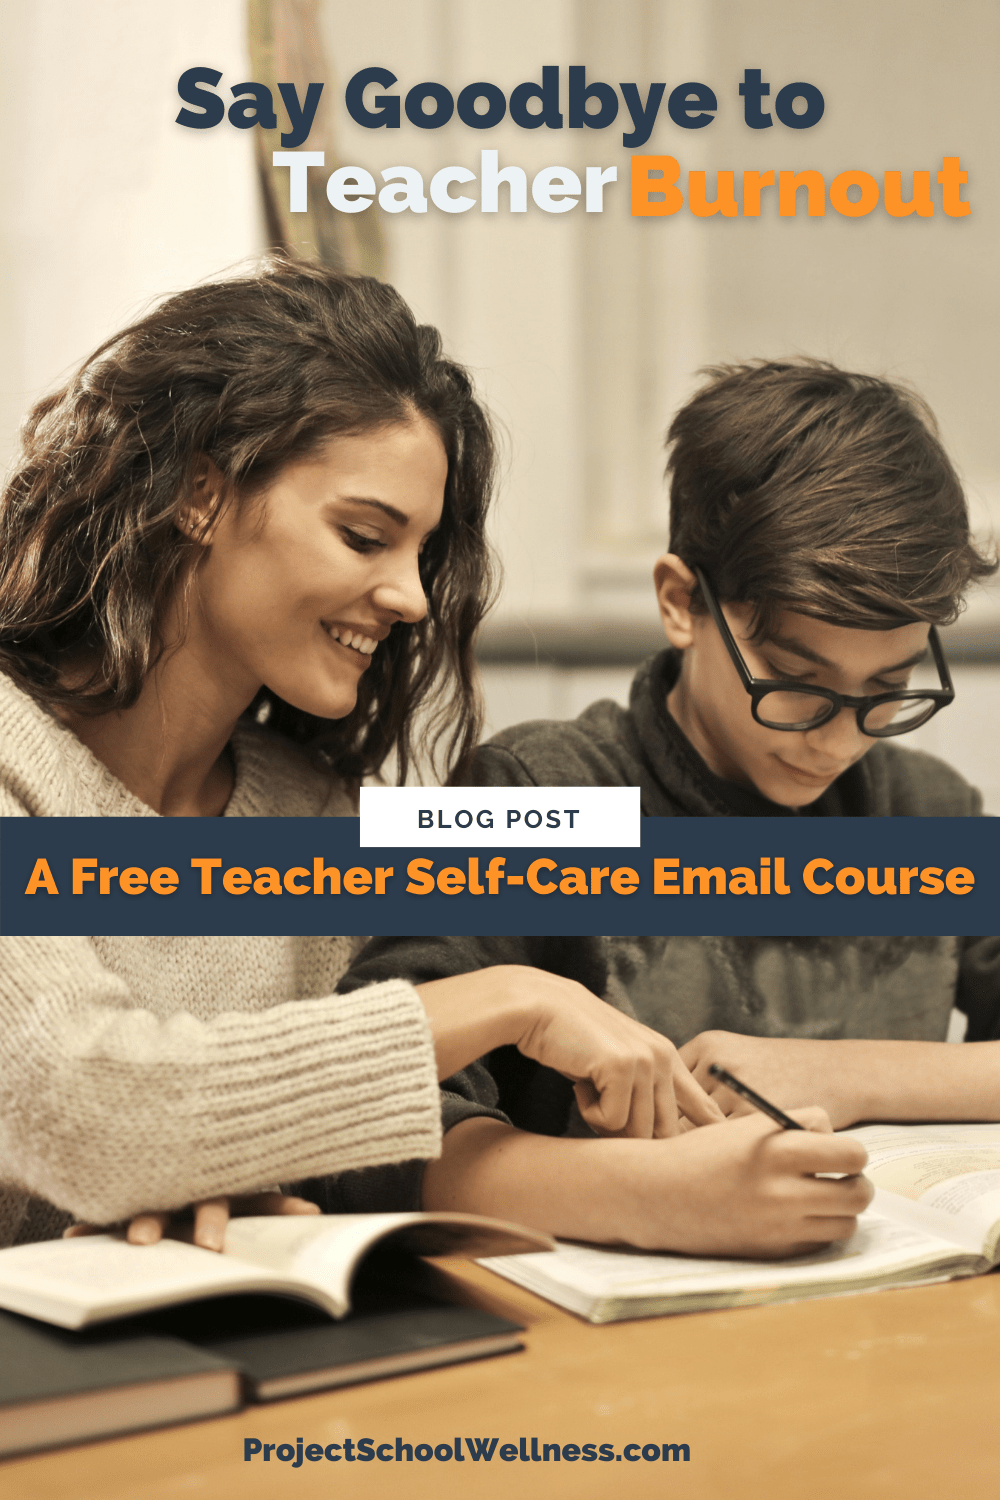 A free Teacher Self-Care email course by Project School Wellness. Designed to help teachers overcome burnout and live their best lives.